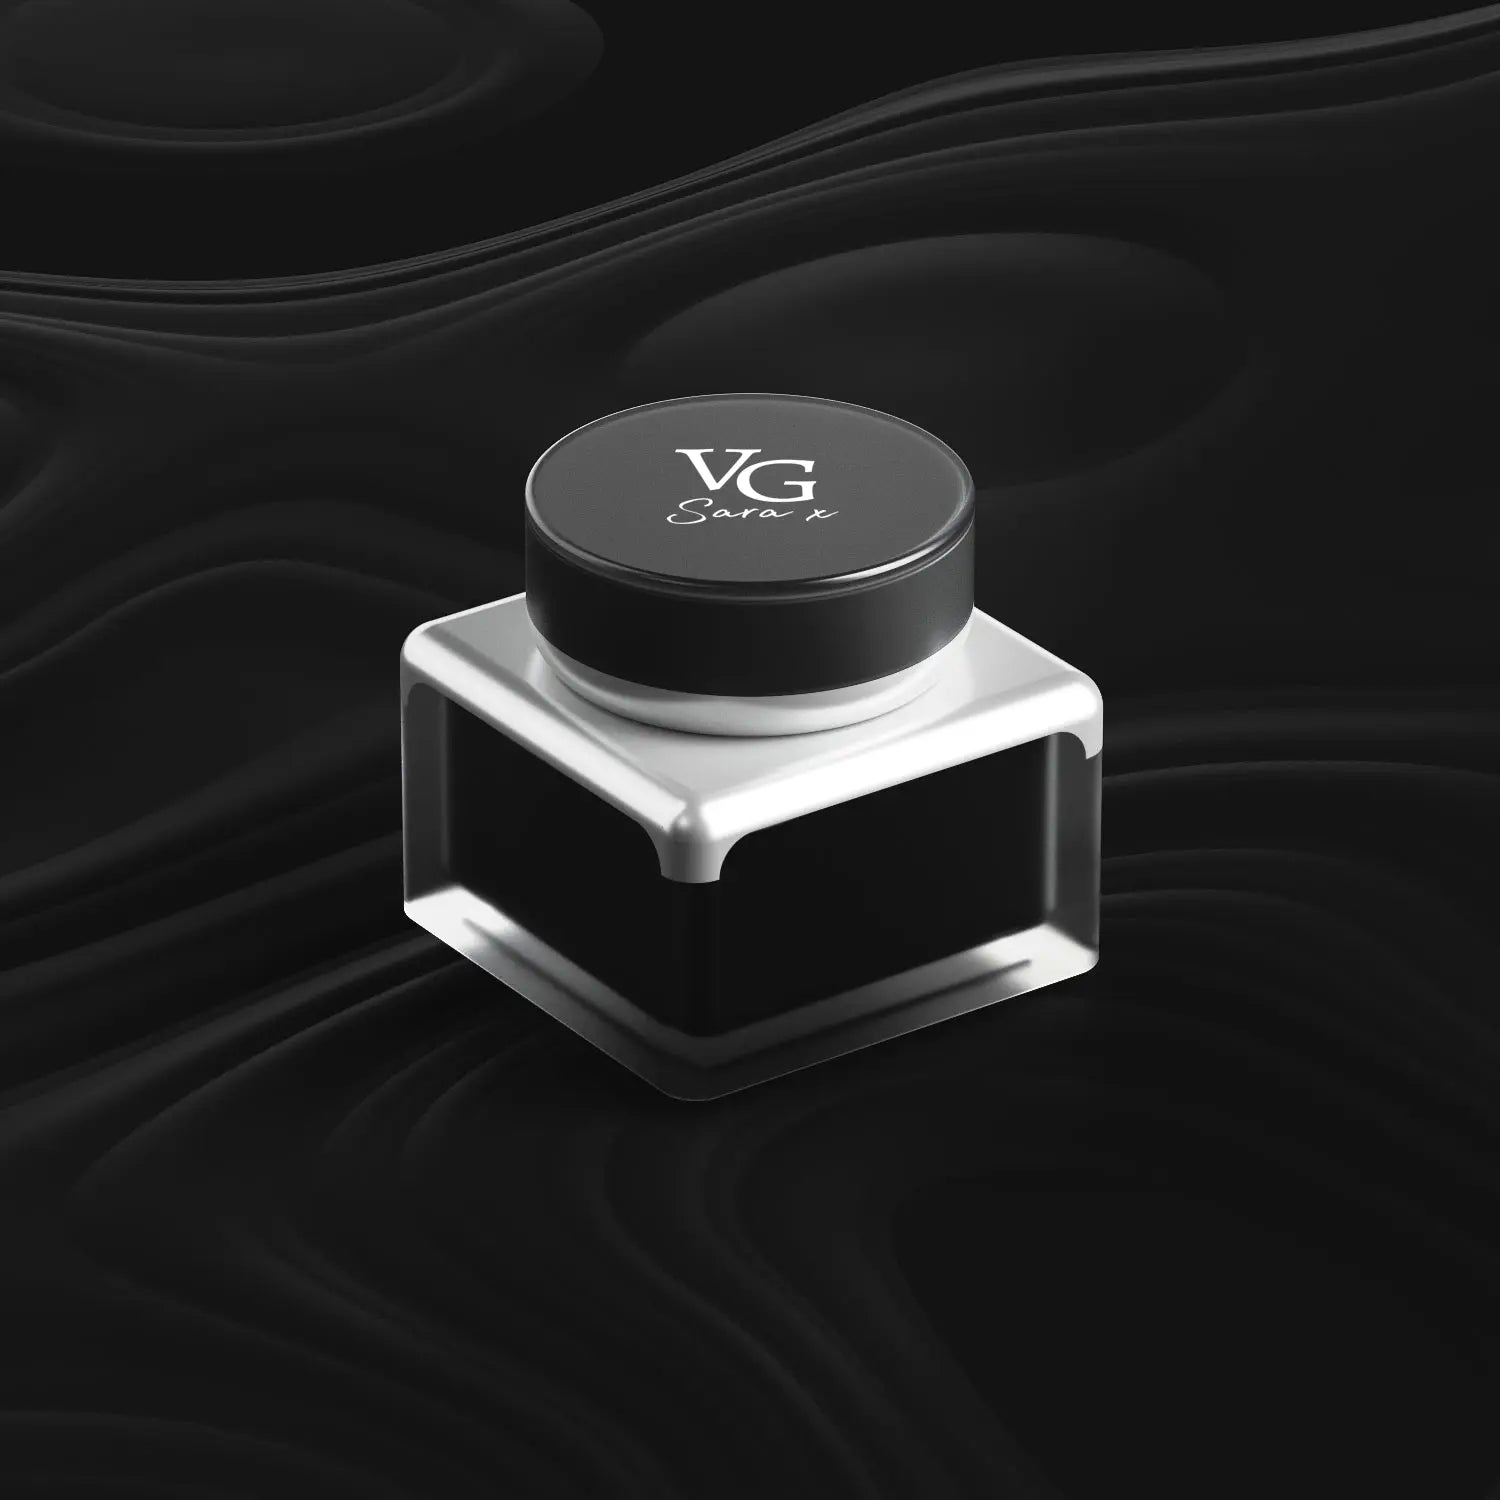 Eye cream for men with antioxidant properties in an elegant container with the logo VG sara x